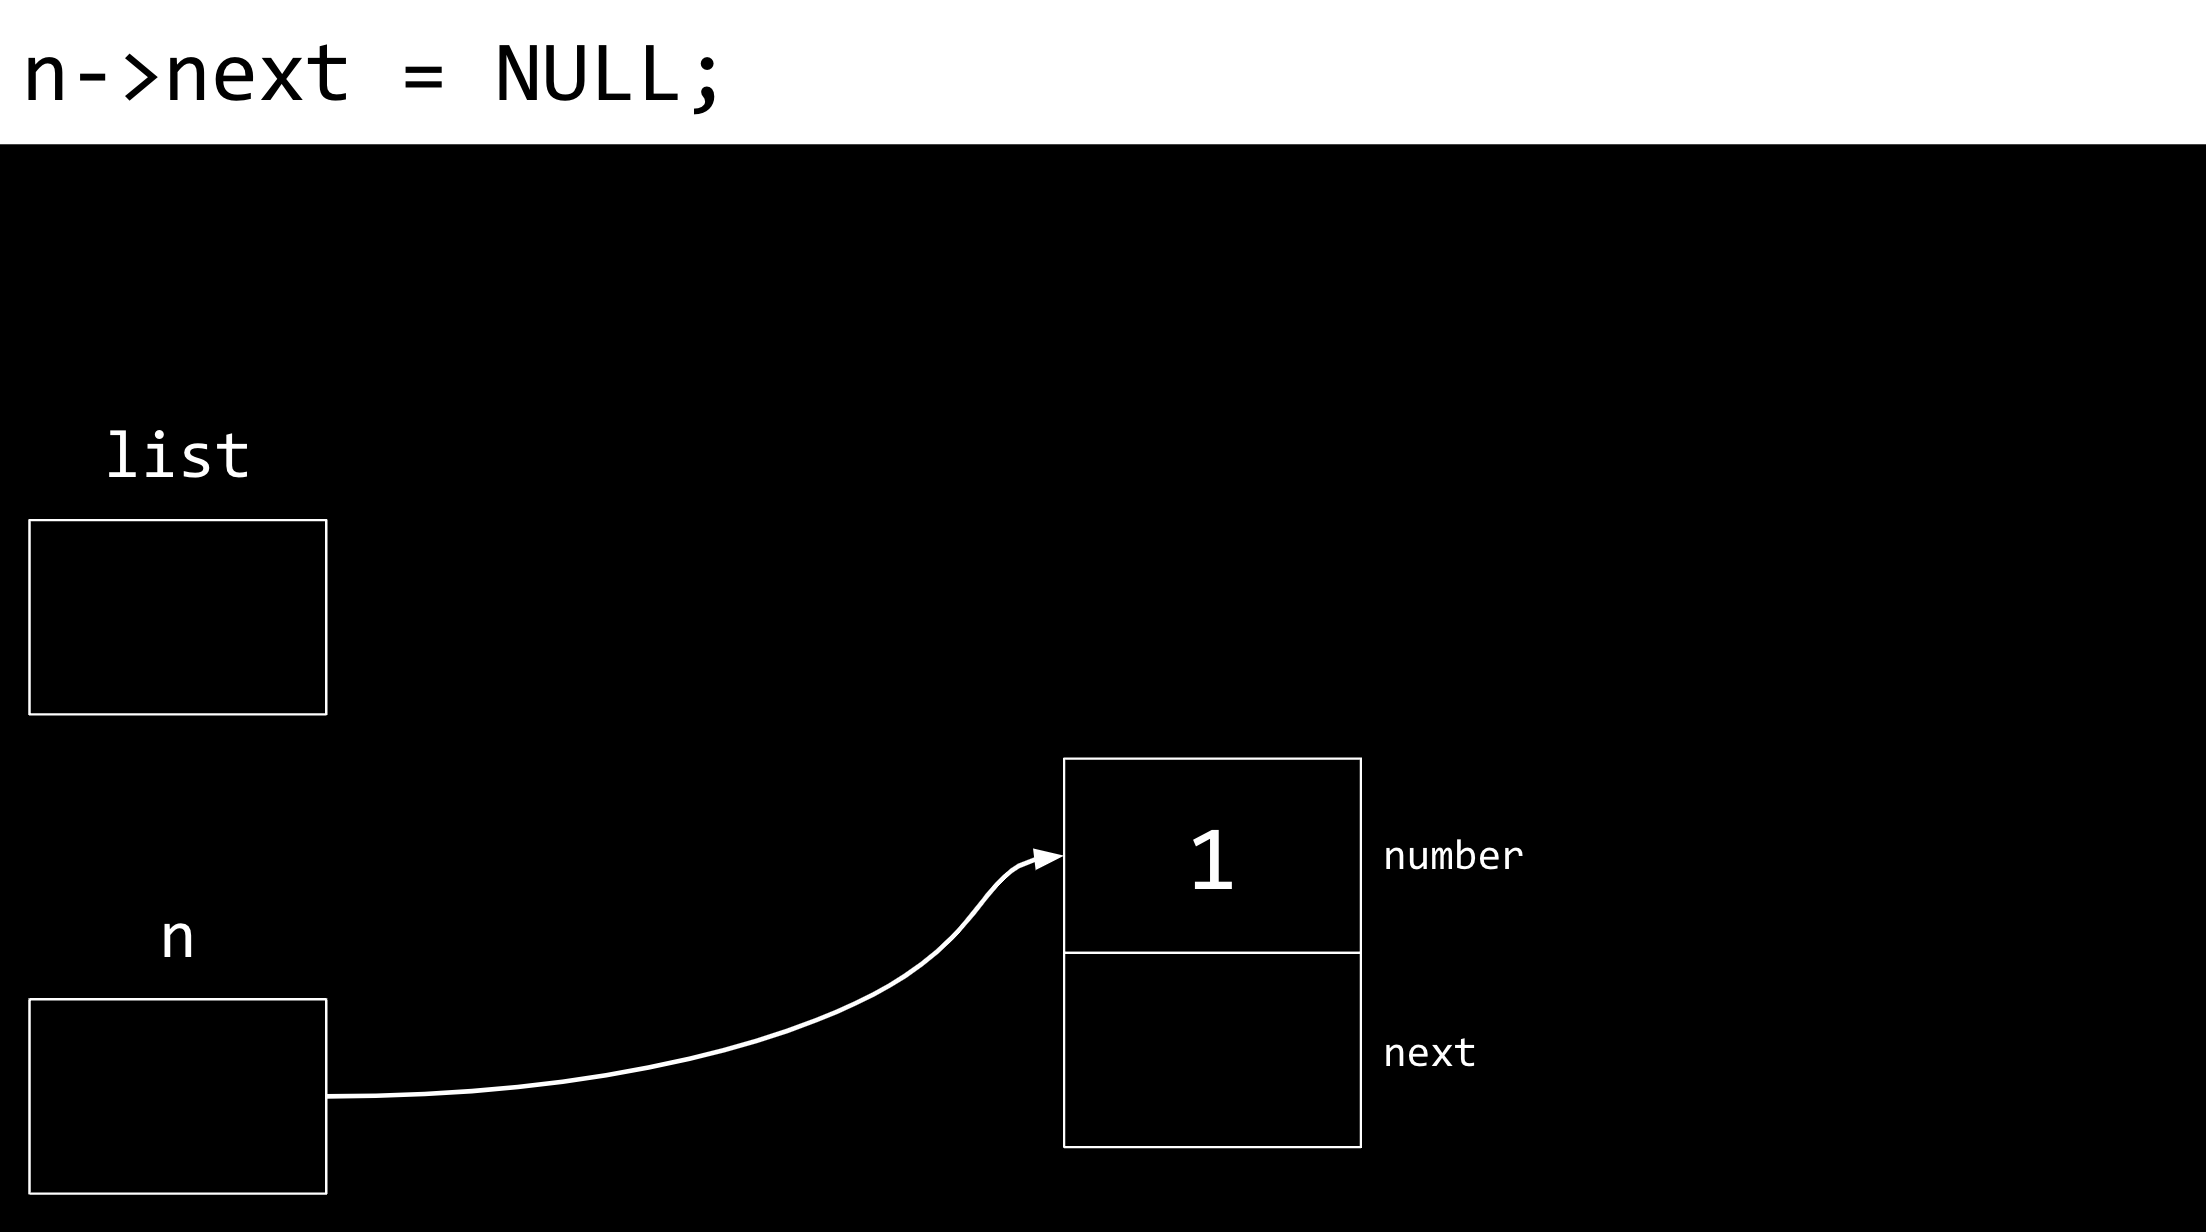 n pointing to a node with 1 as the number and null as the value of next